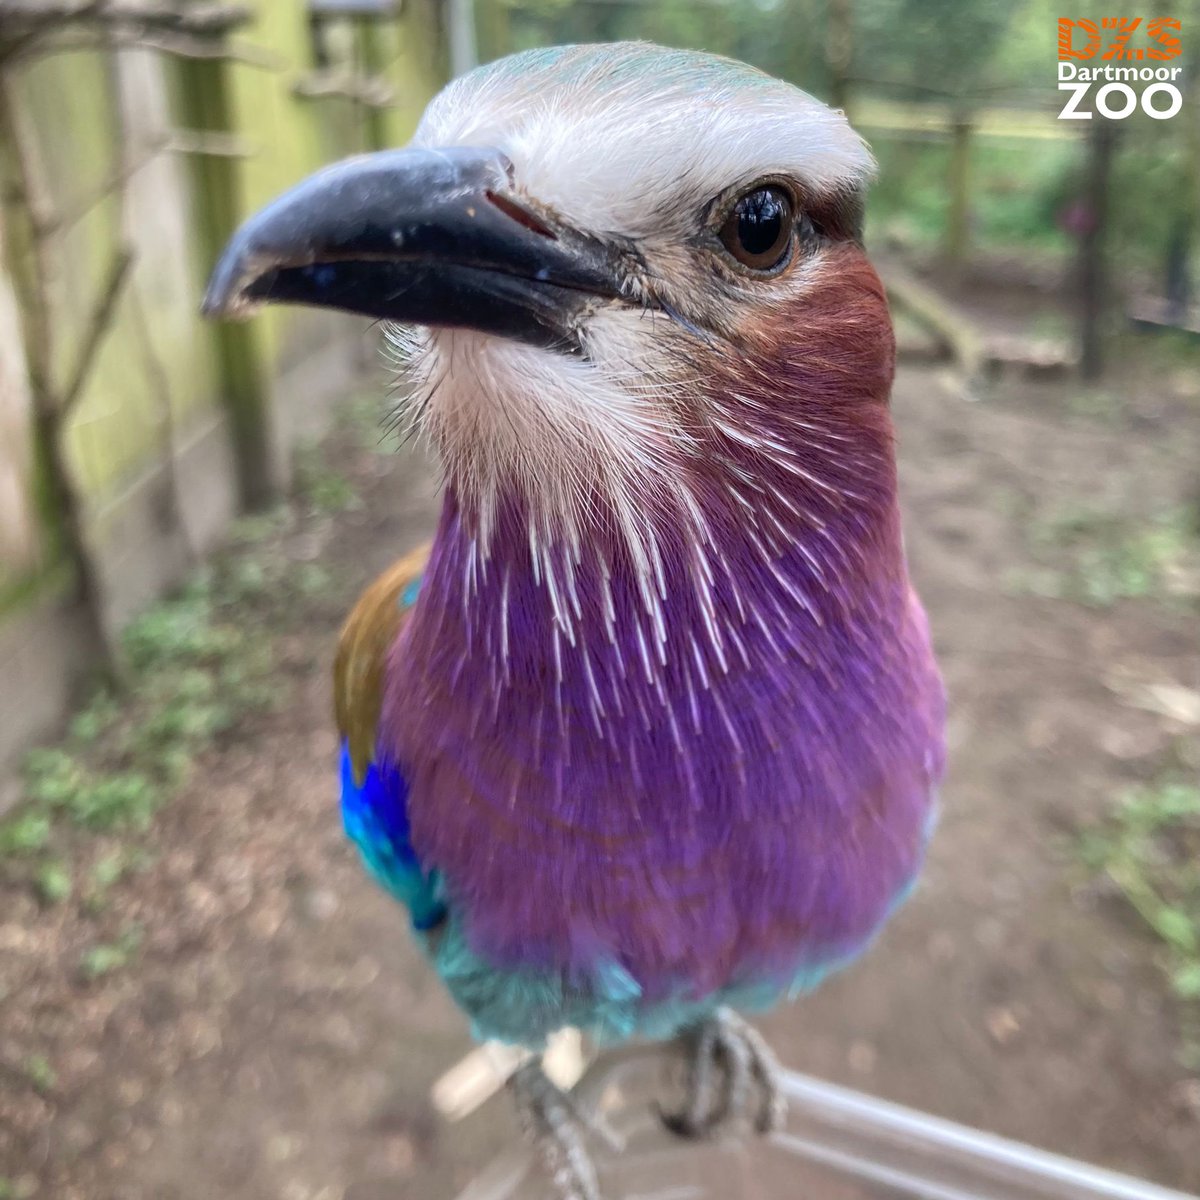 🎉 Happy 4th Birthday Mrs Roller! 🎂

📷 Animal Manager Maddy

#DartmoorZoo #DZS #Devon #LilacBreastedRollers